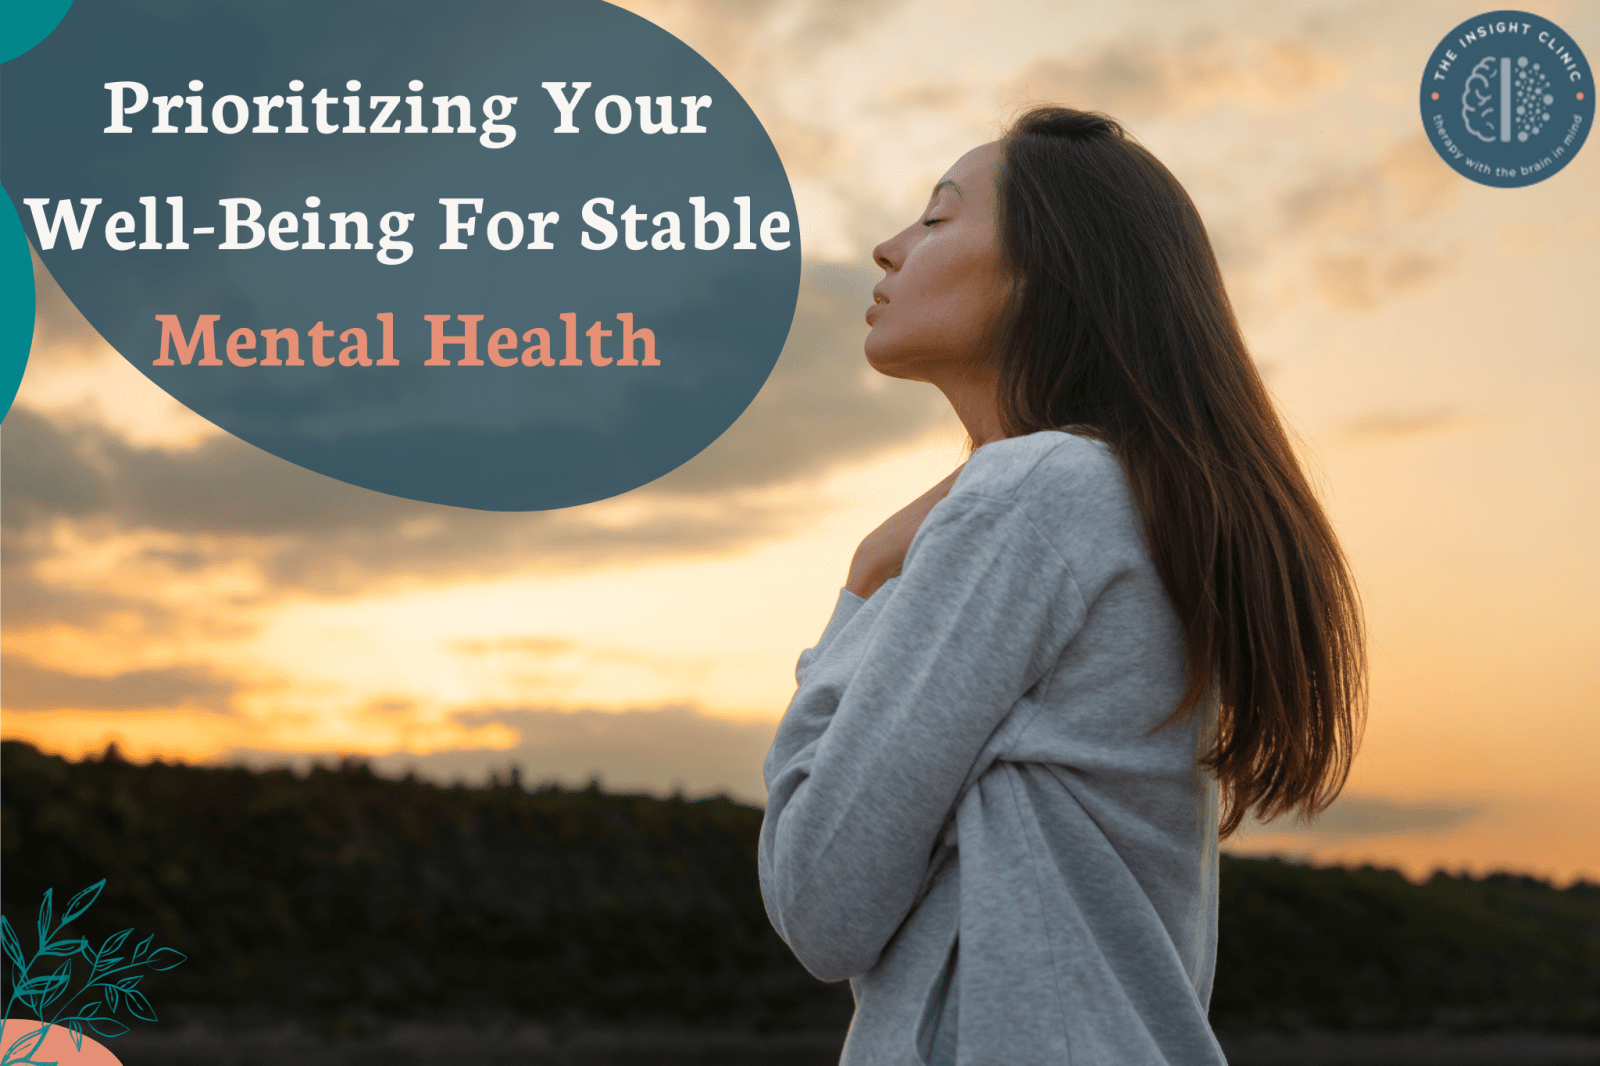 Prioritizing your well-being is the key to achieving stable mental health